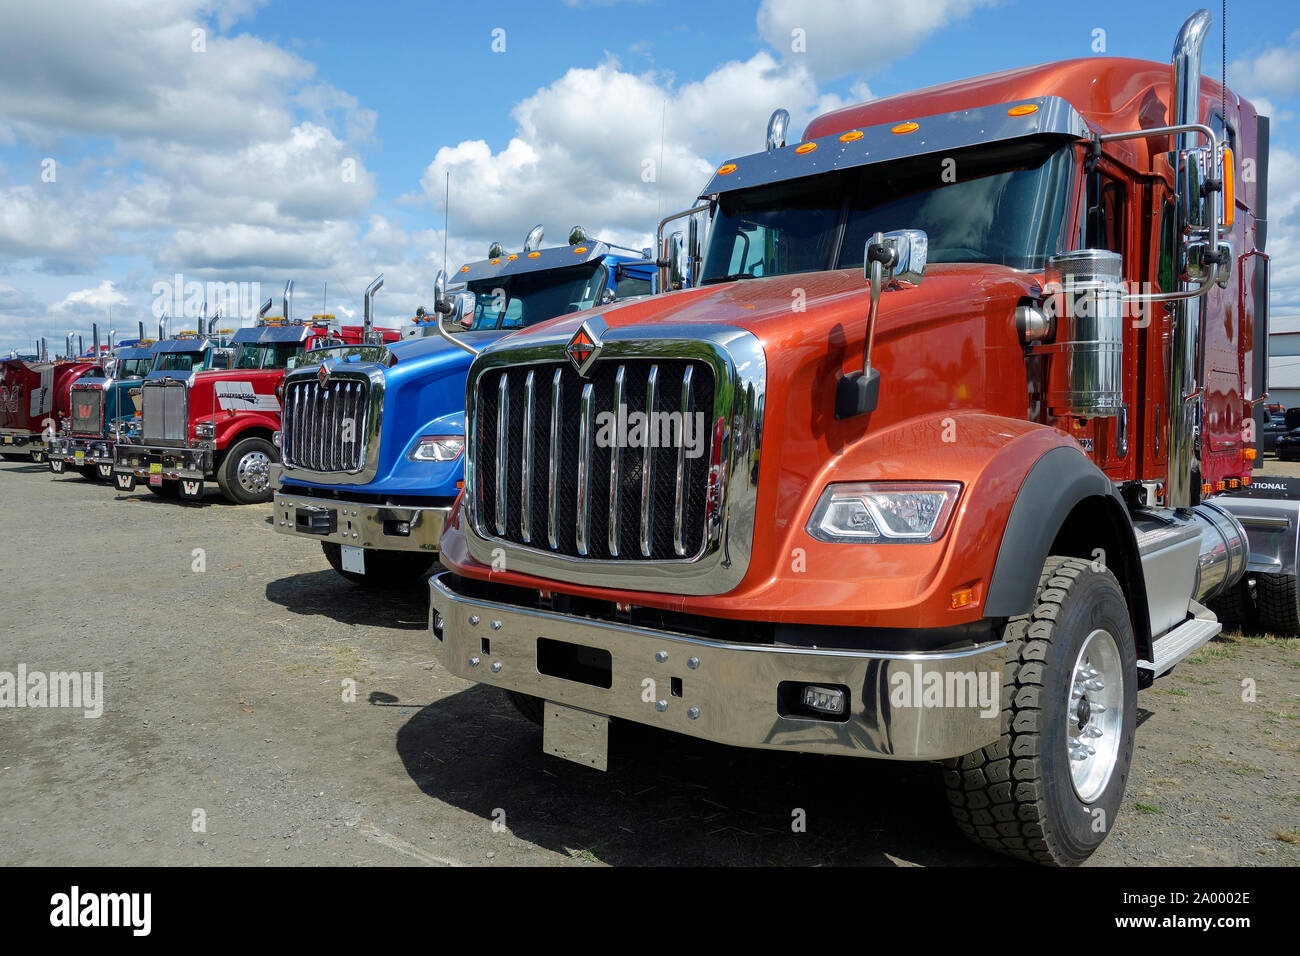 A lineup of semi tractor trailer trucks at a show Stock Photo